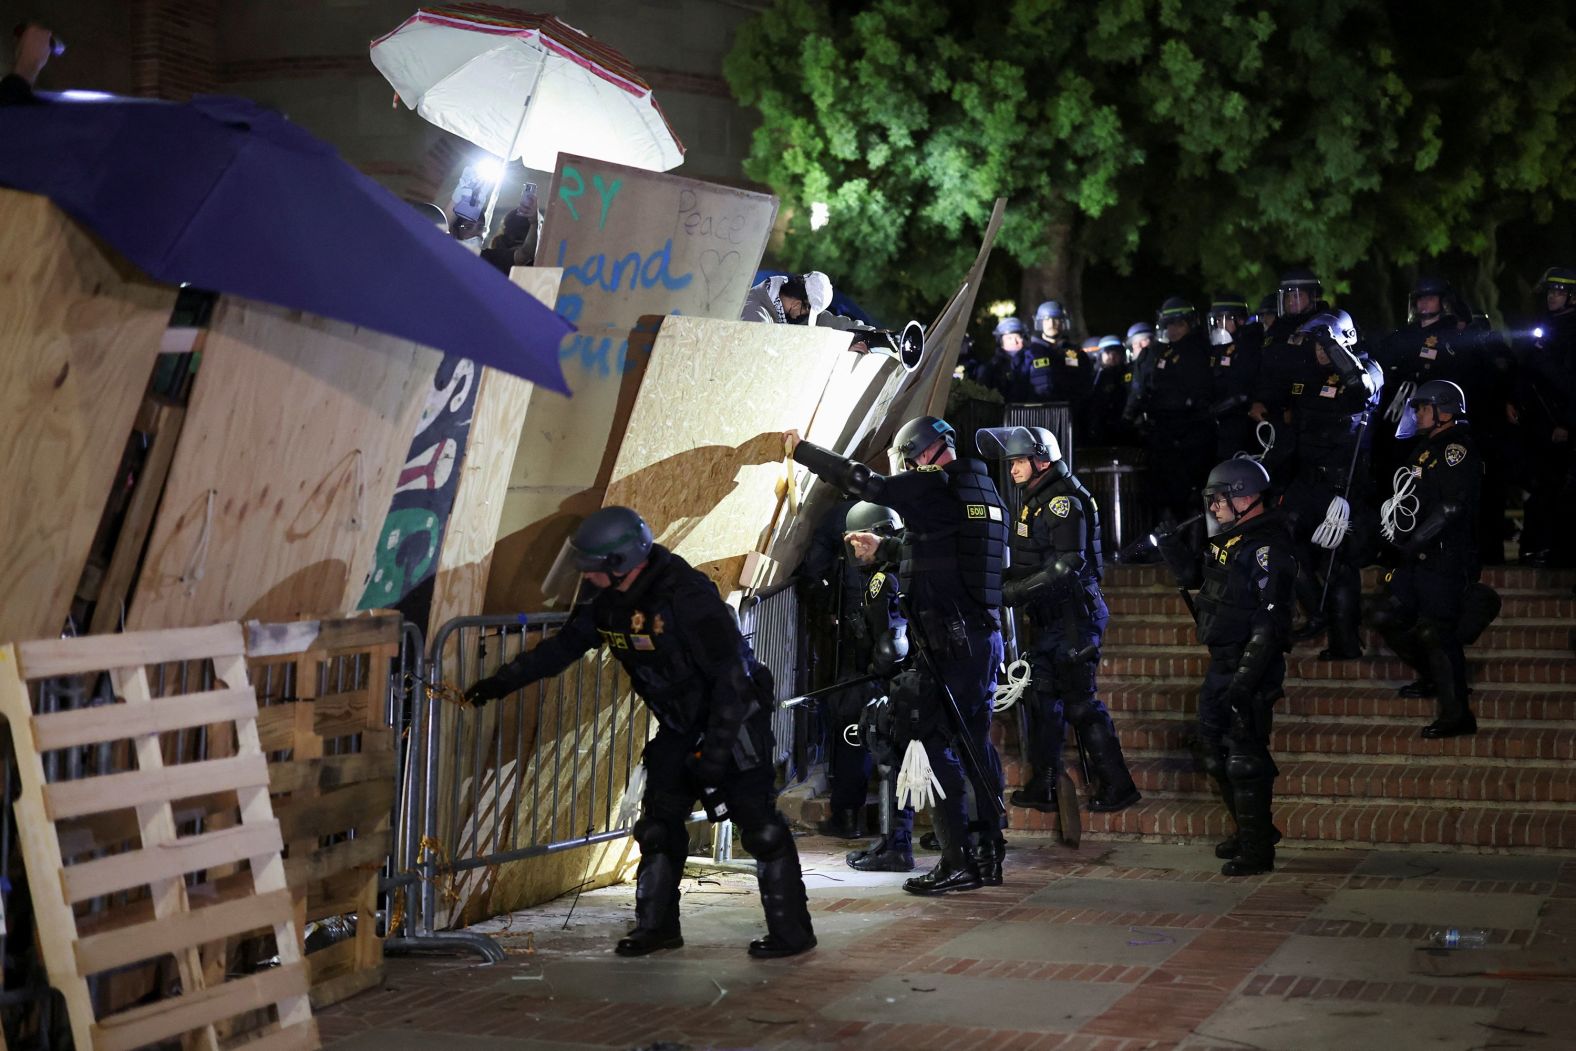 Police take down a barricade as protesters gather at an encampment at UCLA on May 2.